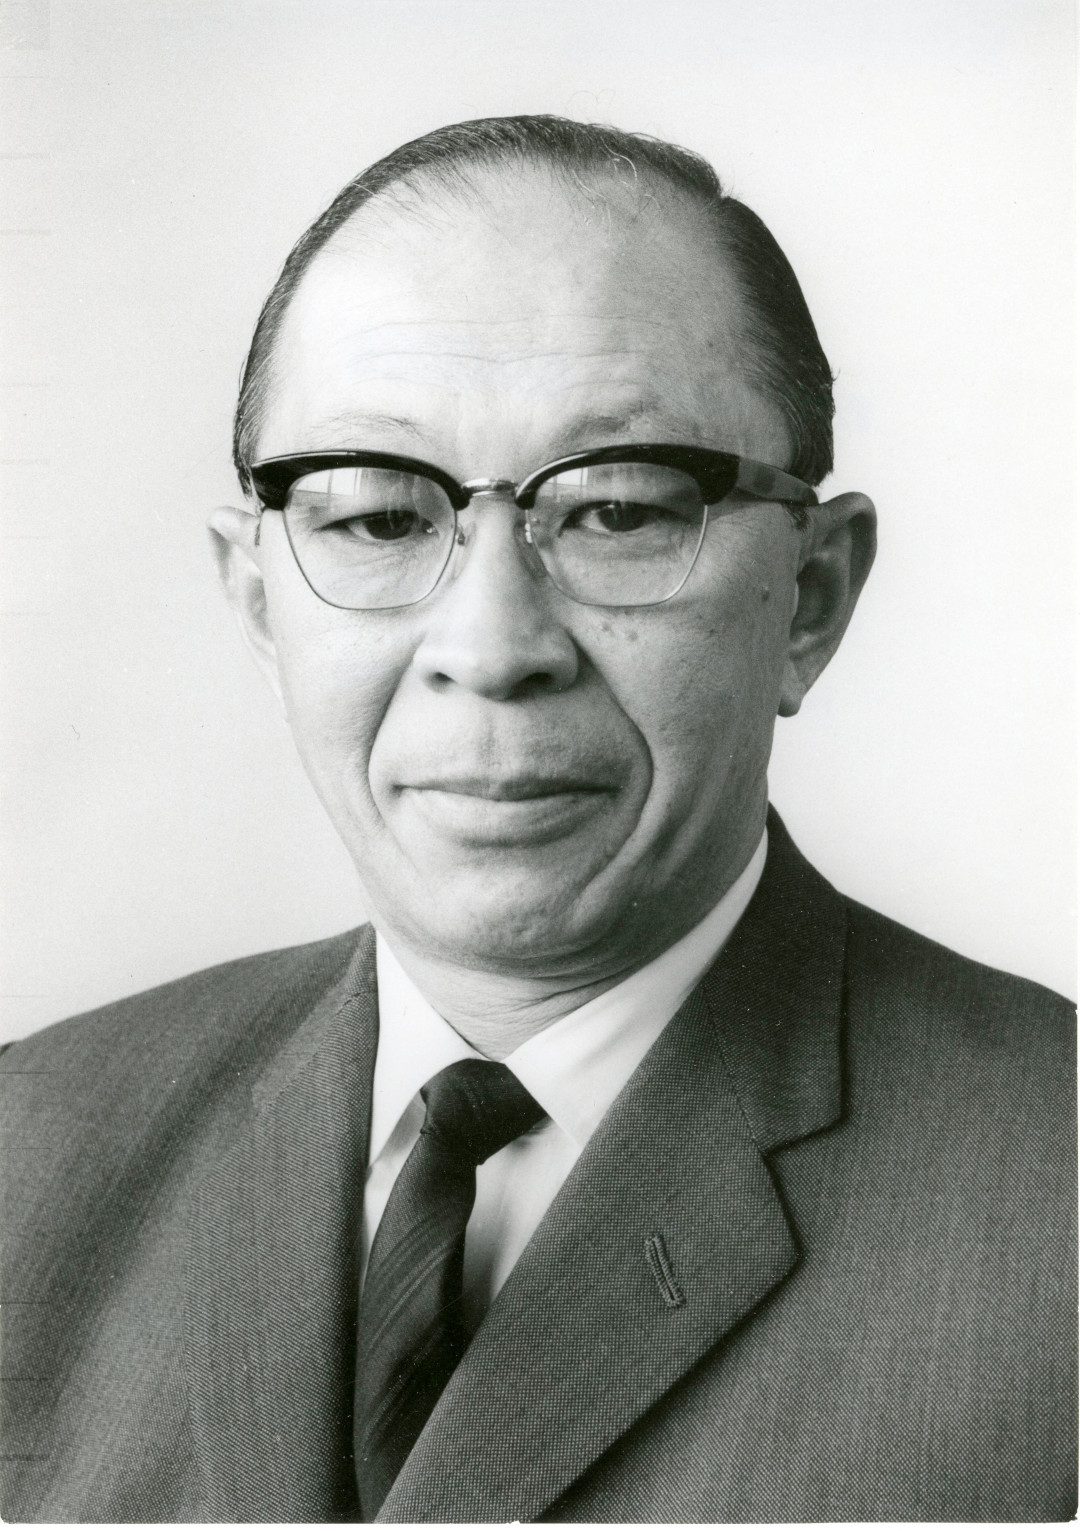 Source: Toshiro Henry Shimanouchi, People Files, Special Collections and College Archives, Occidental College, Los Angeles, CA.